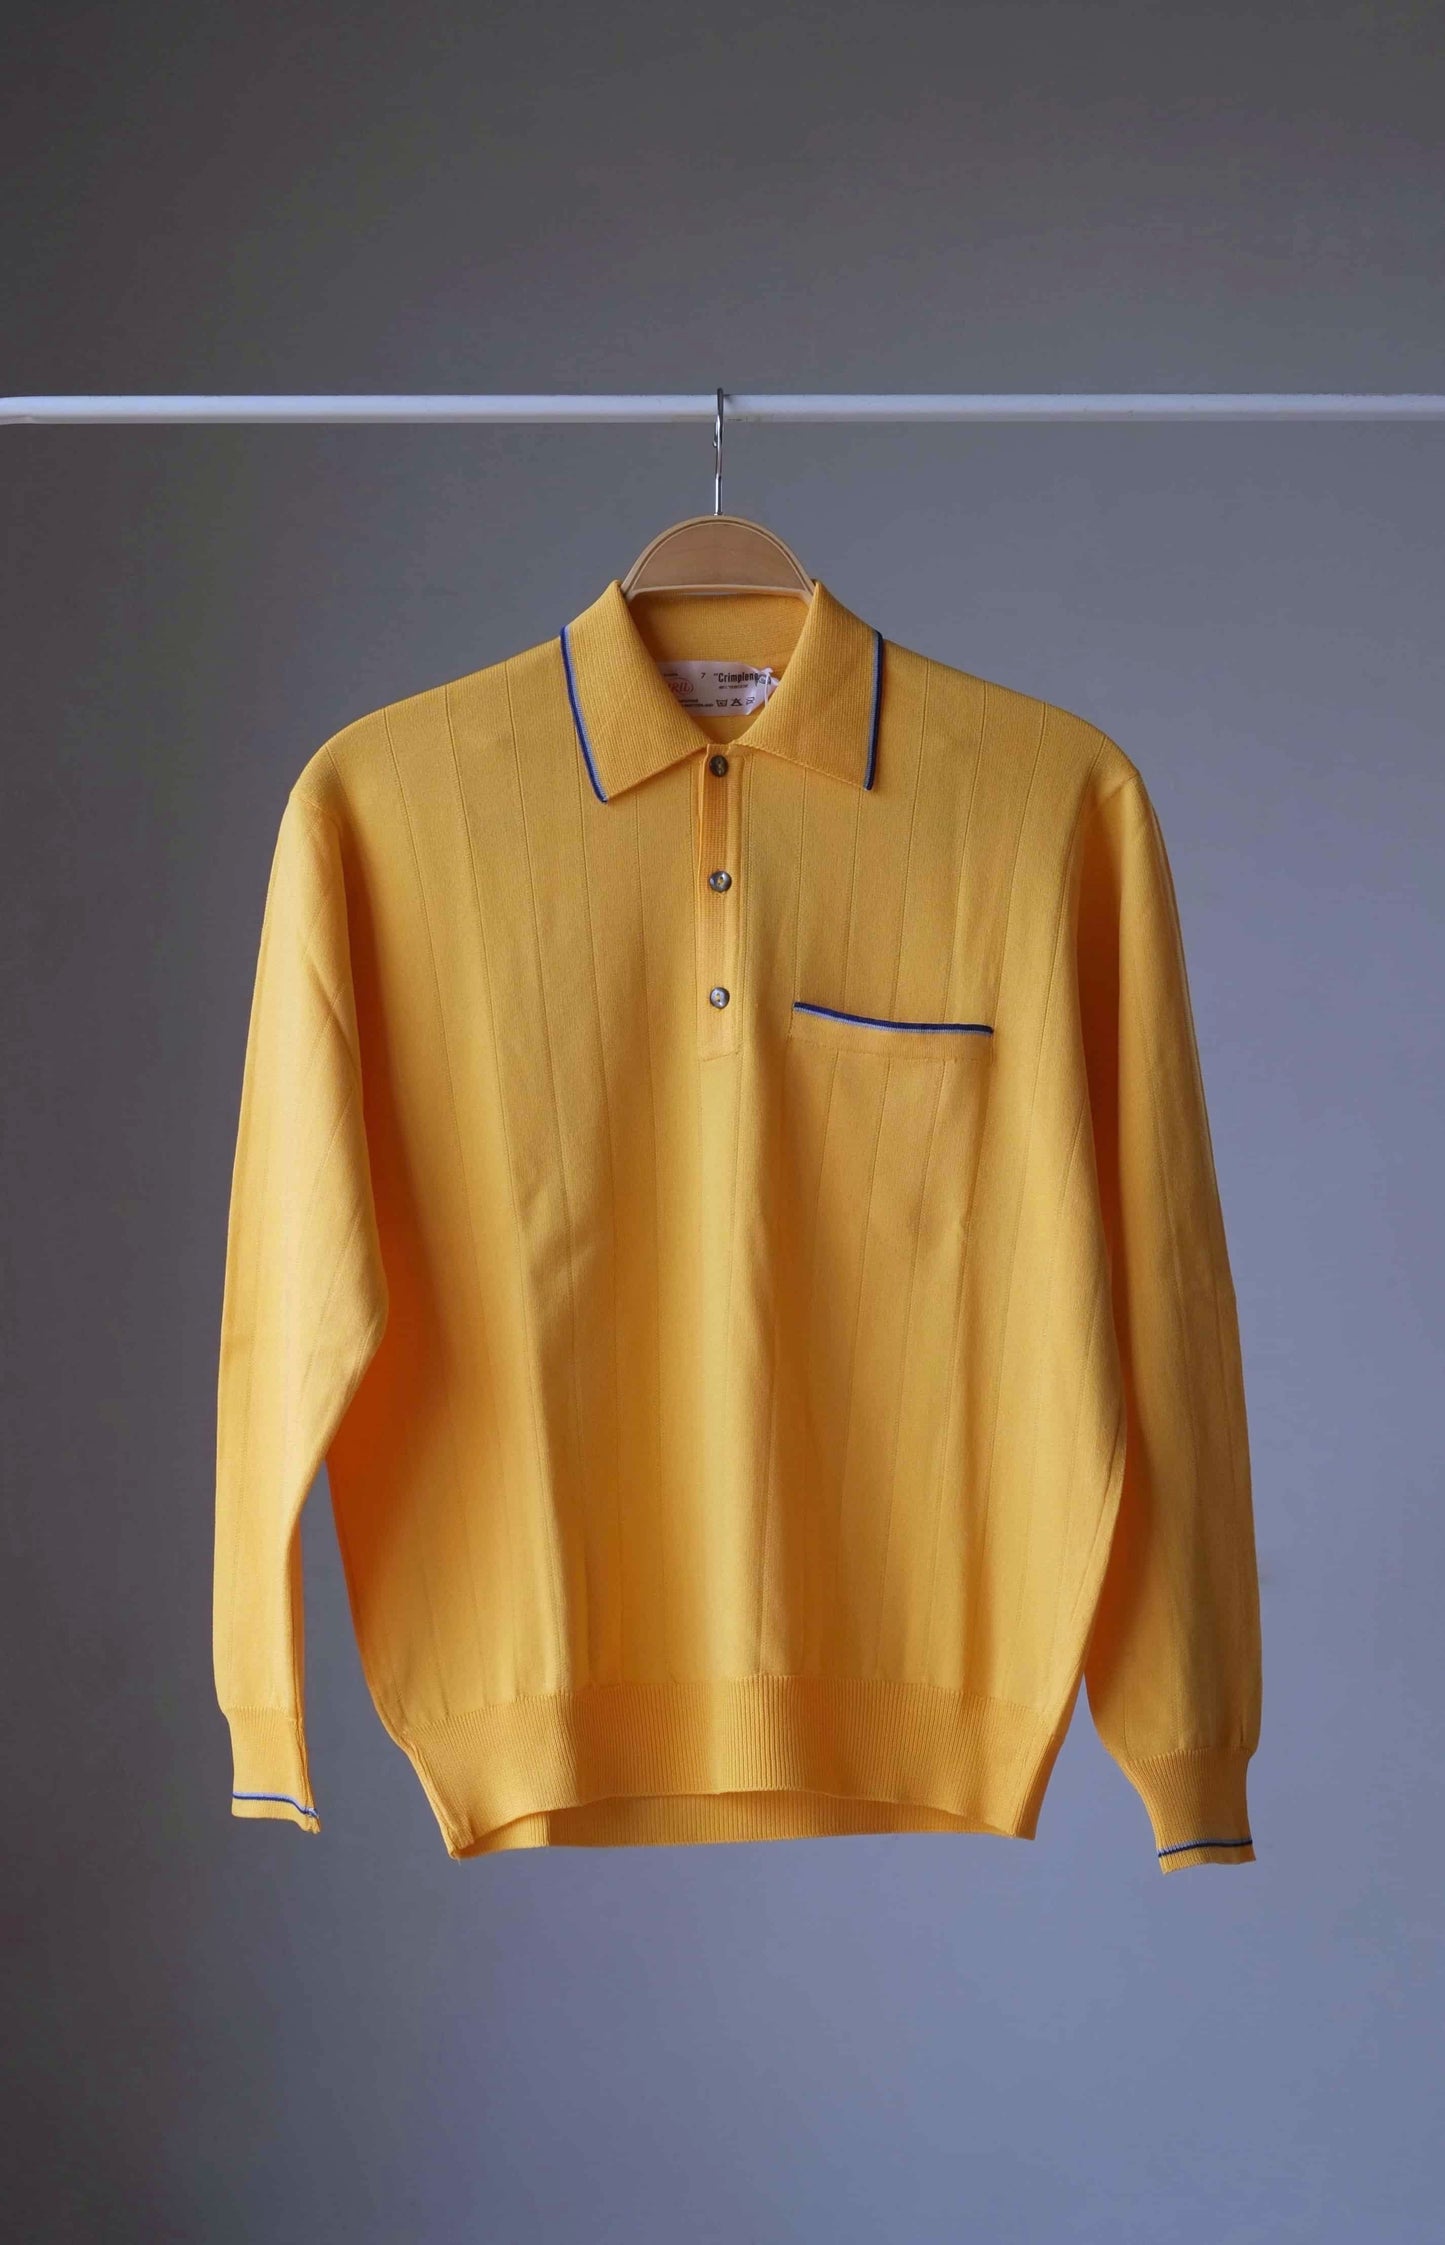  Vintage 70's Long Sleeves Knit Polo yellow